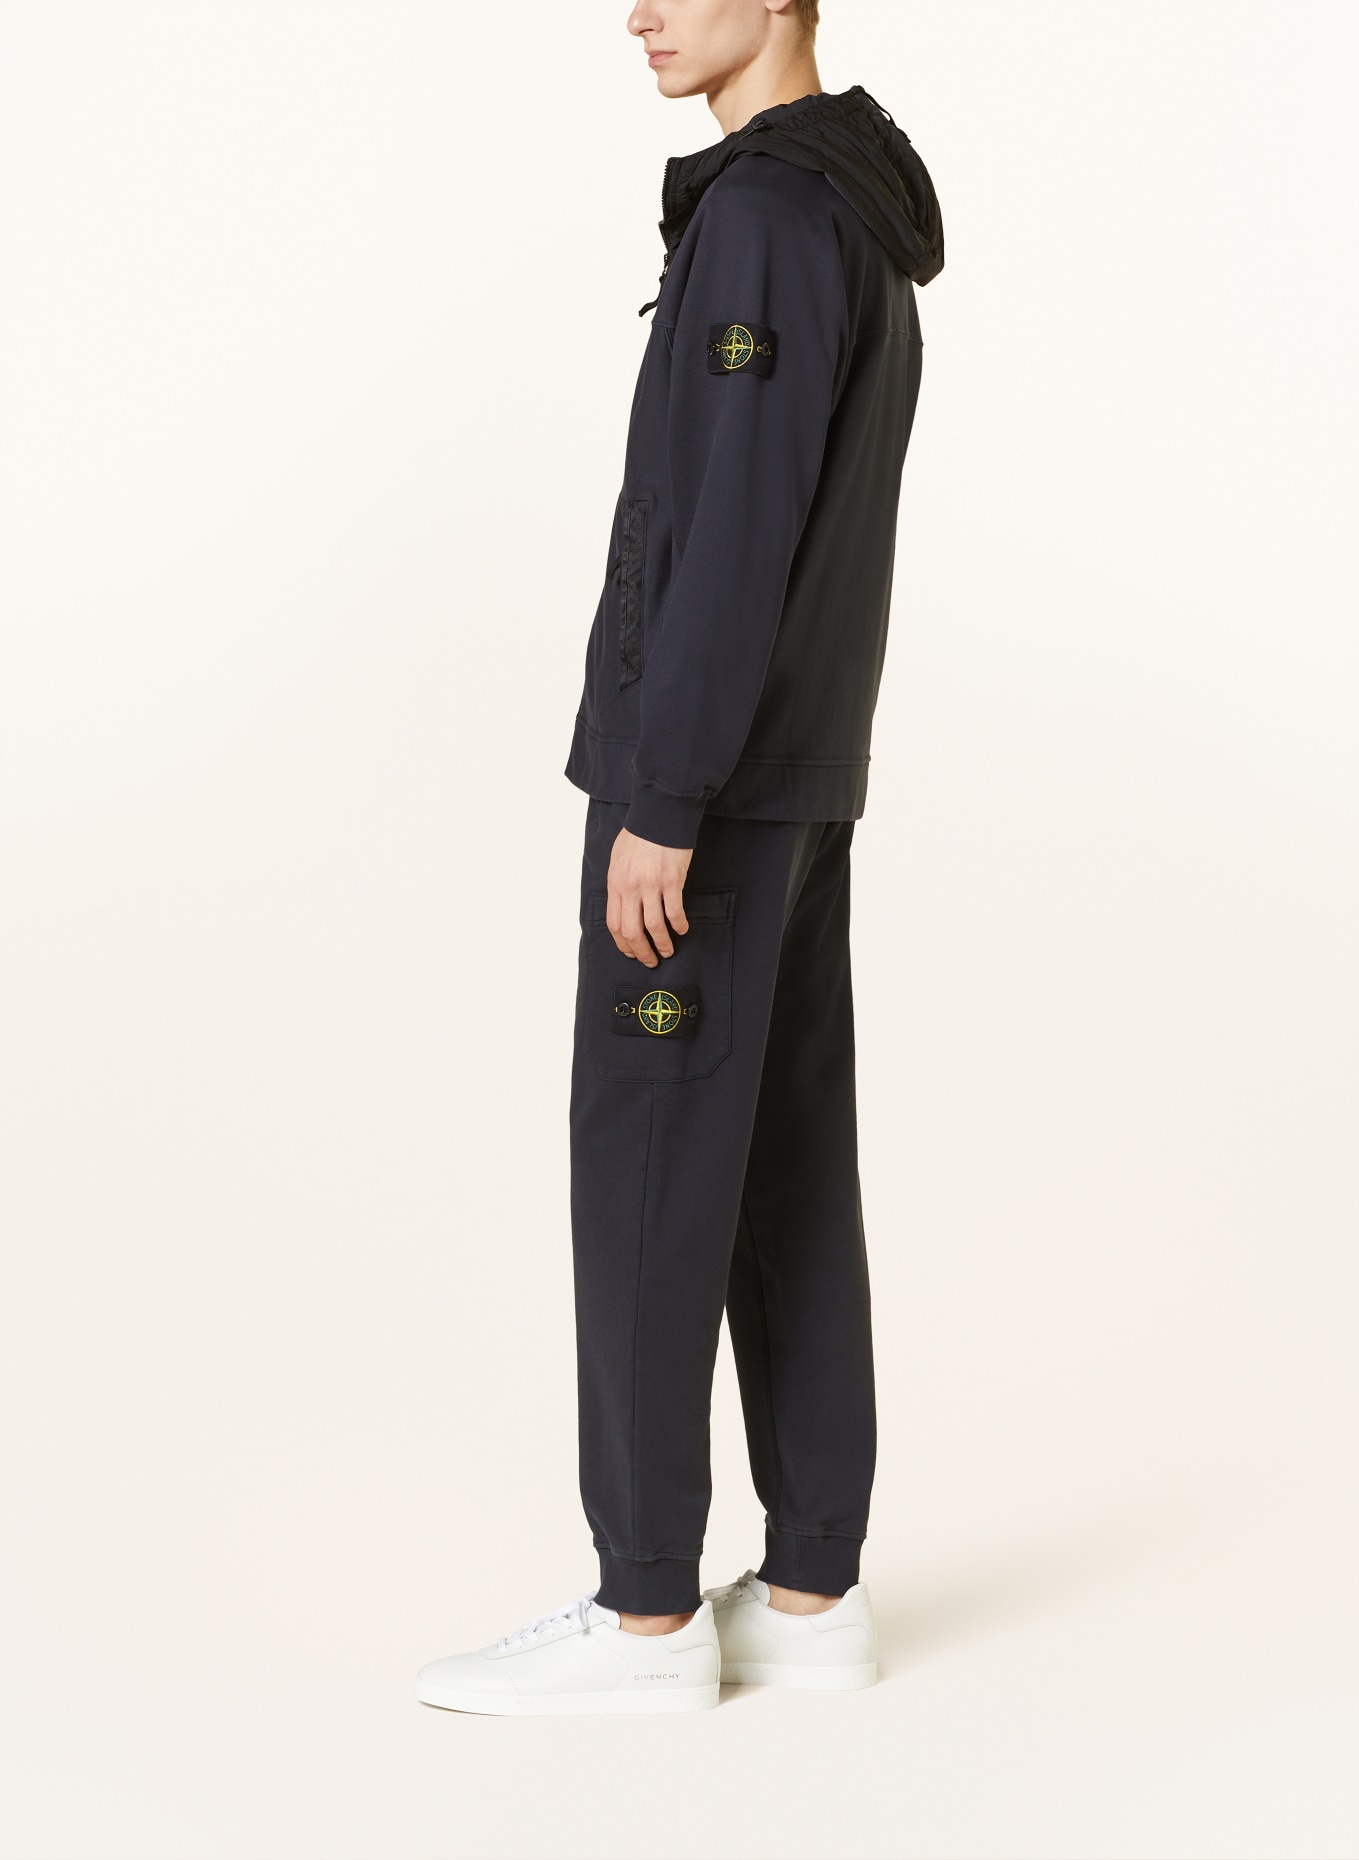 STONE ISLAND Sweat jacket in mixed materials, Color: DARK BLUE/ BLACK (Image 4)